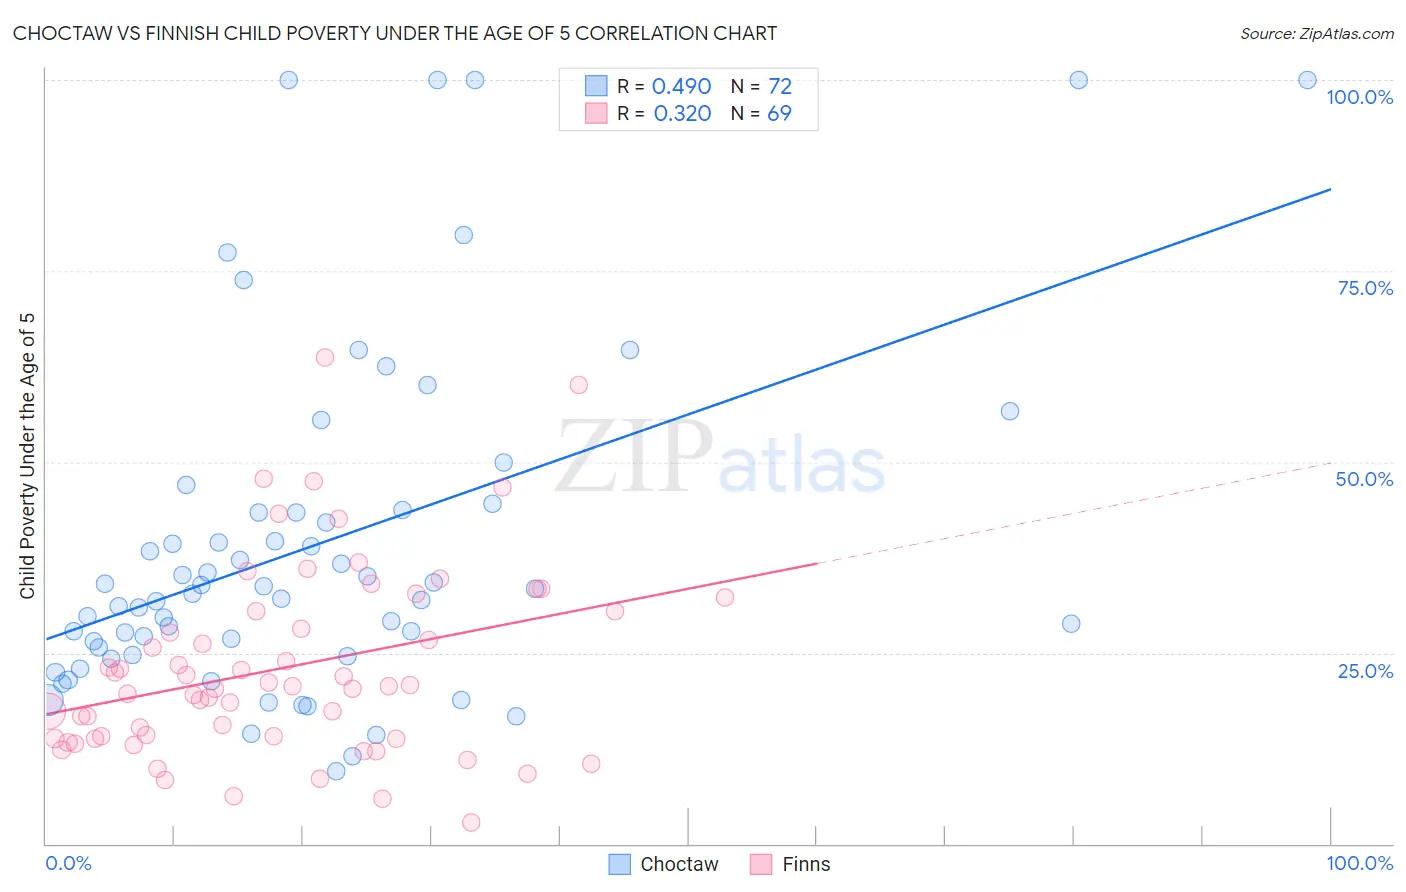 Choctaw vs Finnish Child Poverty Under the Age of 5